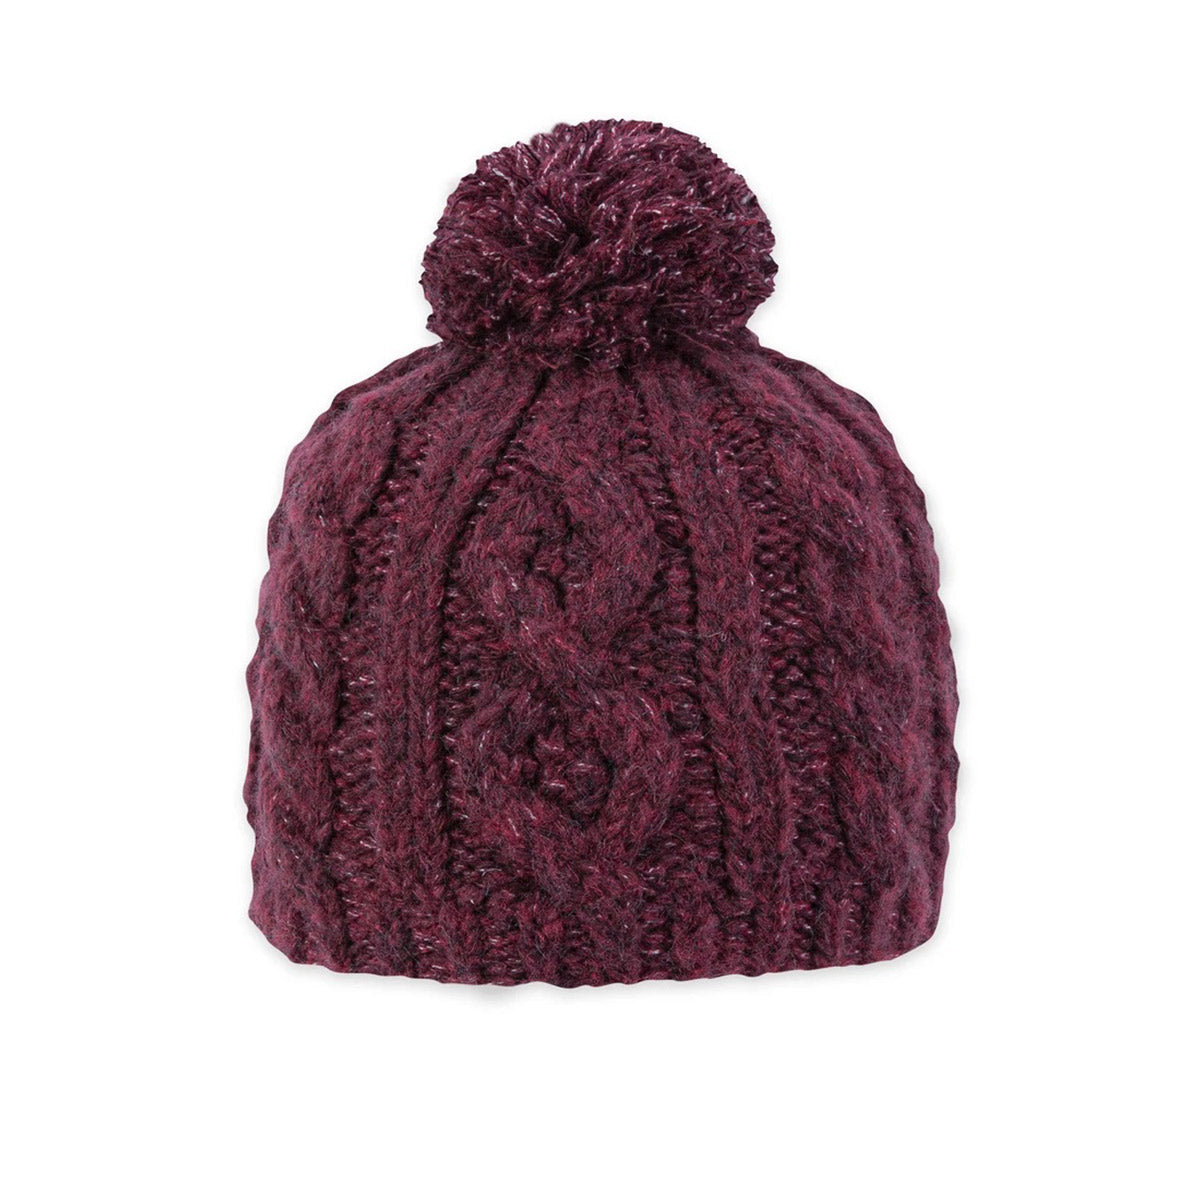 A Pistil Riley Beanie in plum with a pom-pom on top, isolated on a white background.